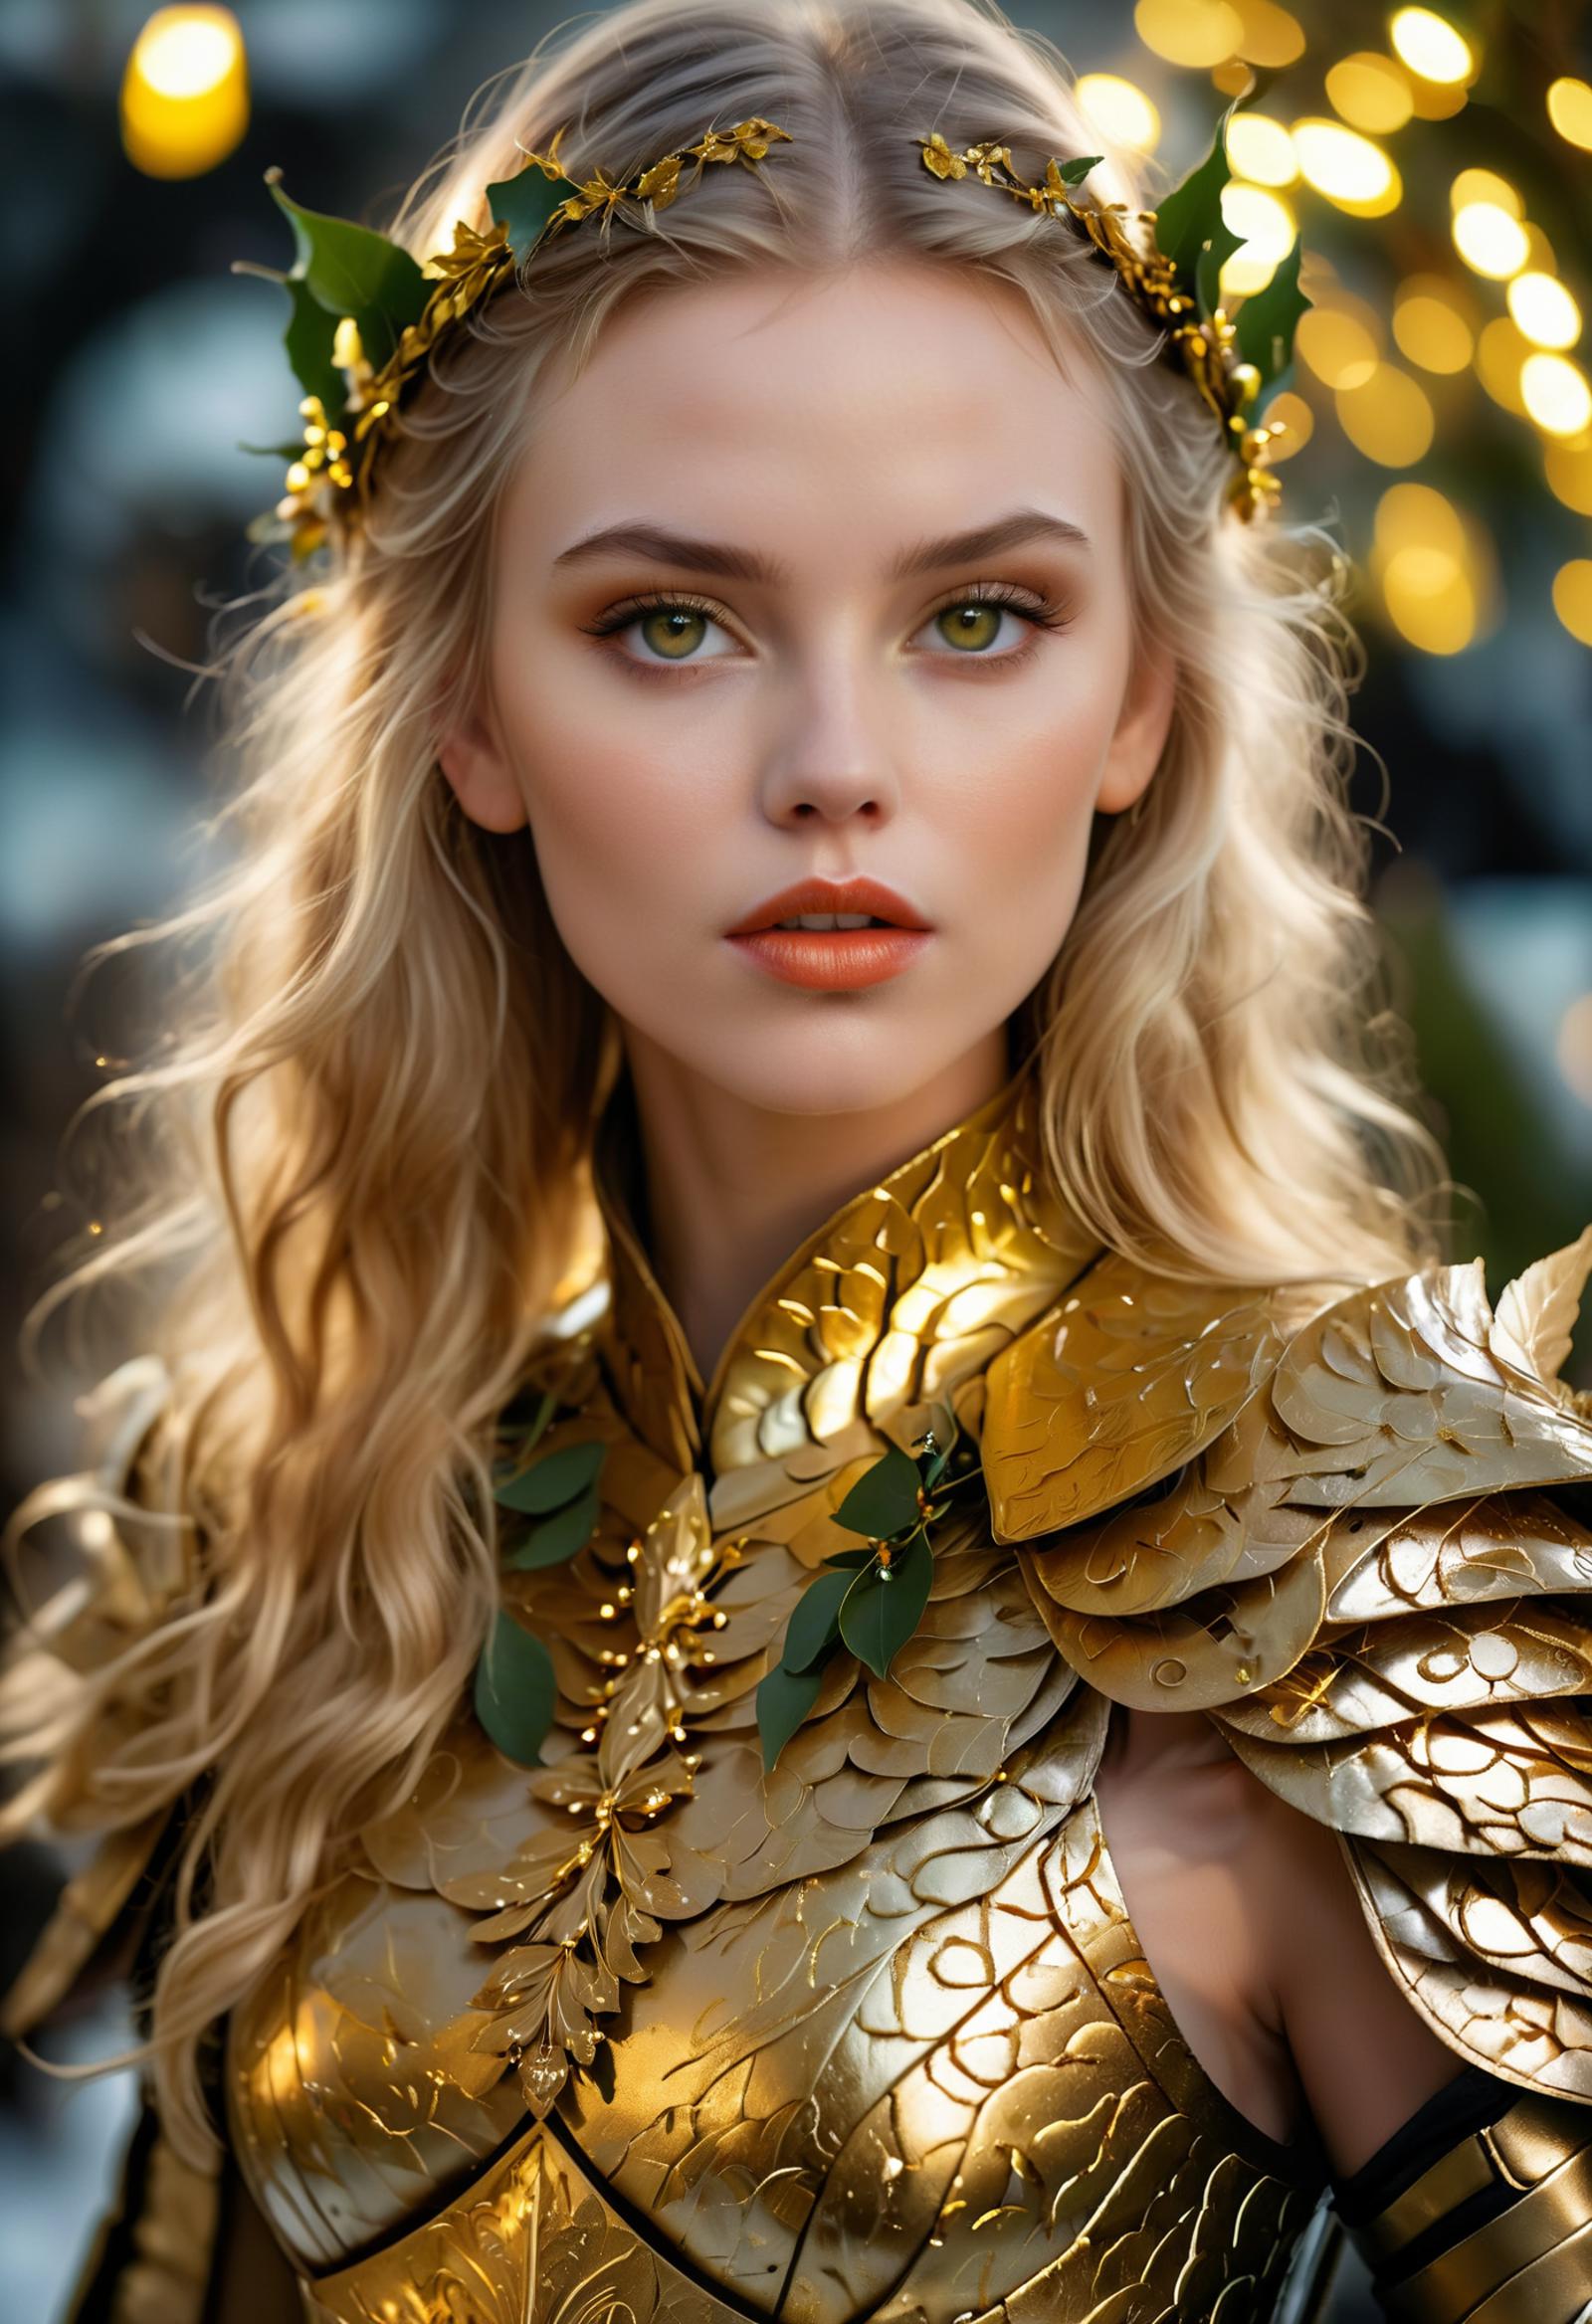 A beautiful blonde woman wearing a gold crown and gold leaf adornments.